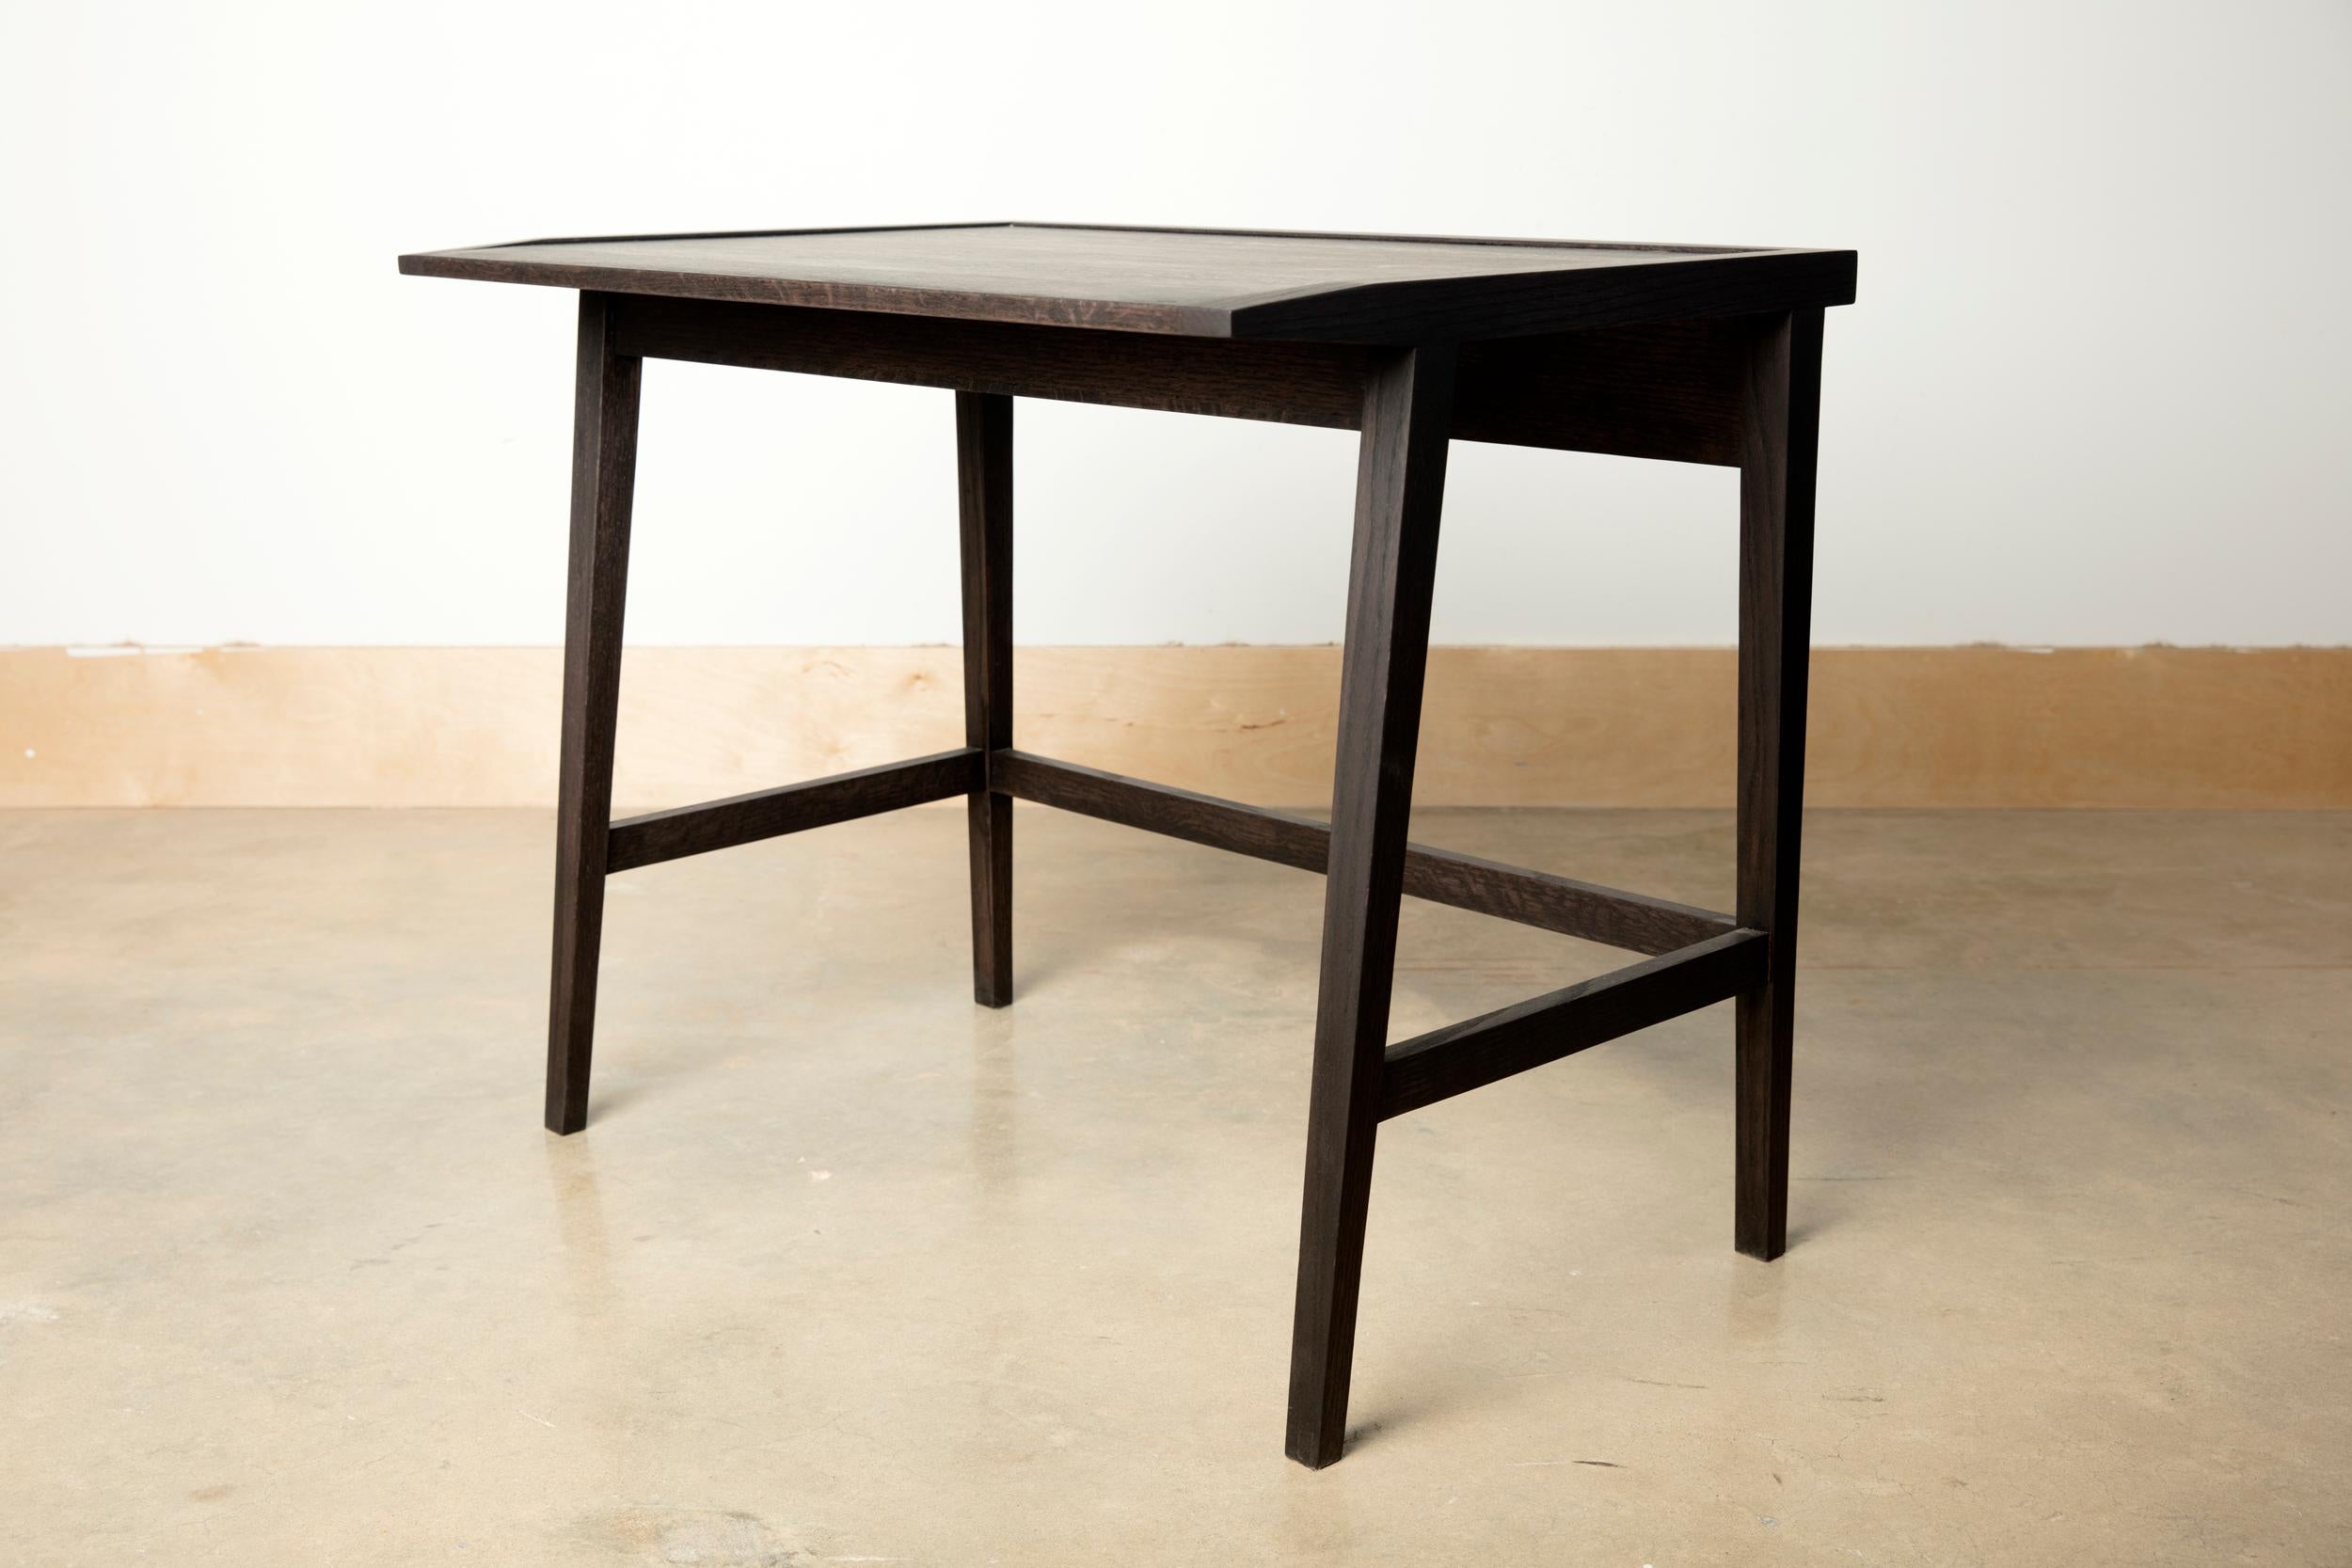 We handcraft this Classic blackened oakwood writing desk and chair set with hardwoods from Birmingham's urban forest. For your home office, computer desk or a place to work from home, comfortable and focused, on a novel or a grocery list. Urban